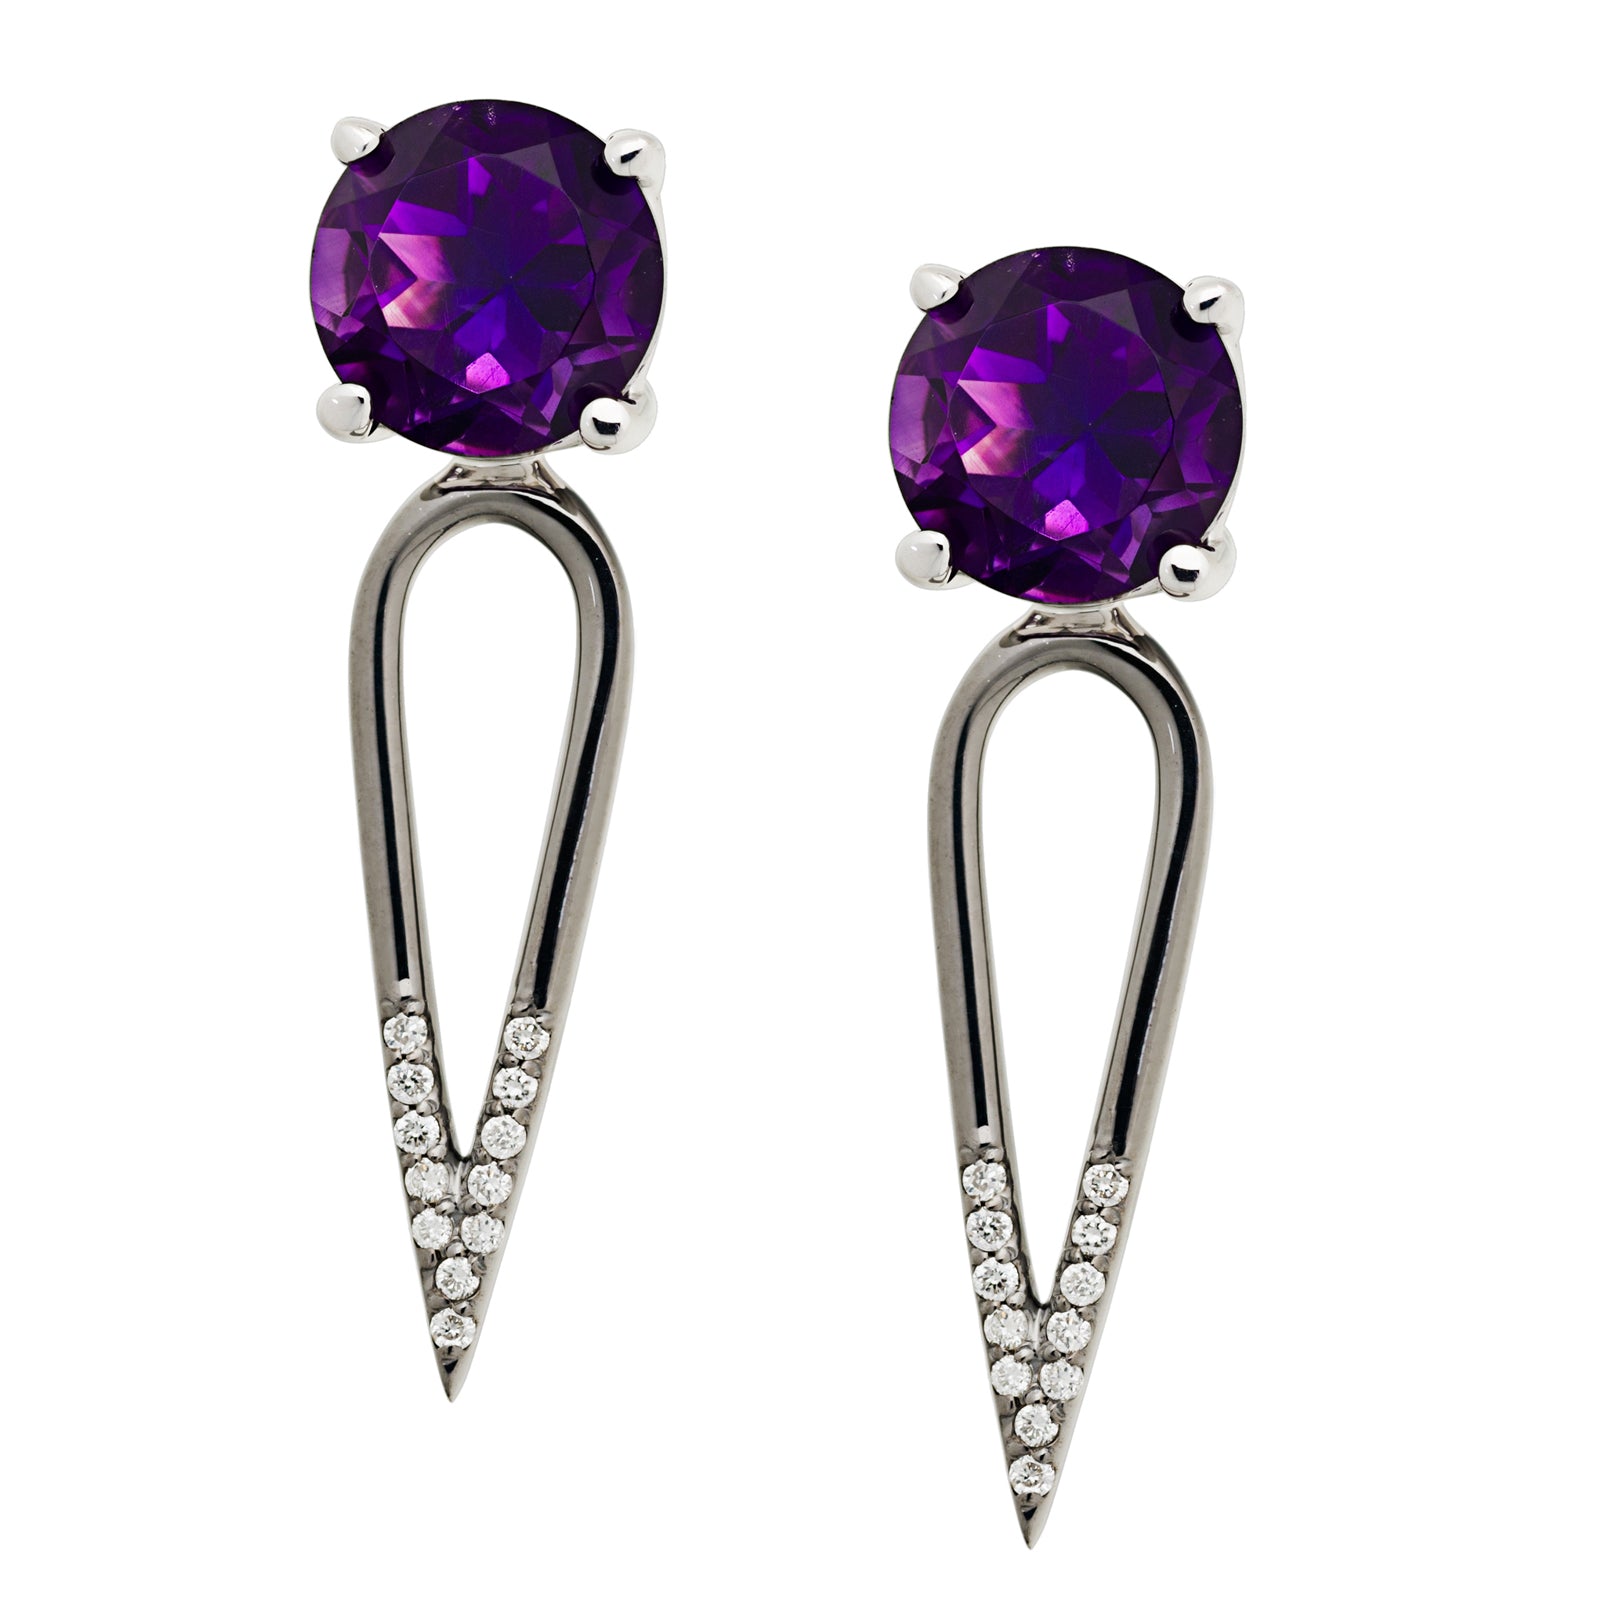 Irini Amethyst gem stone diamond dipped dagger earrings, sterling silver, black rhodium plating, white diamonds are edgy yet elegant and the perfect gift, made in nyc